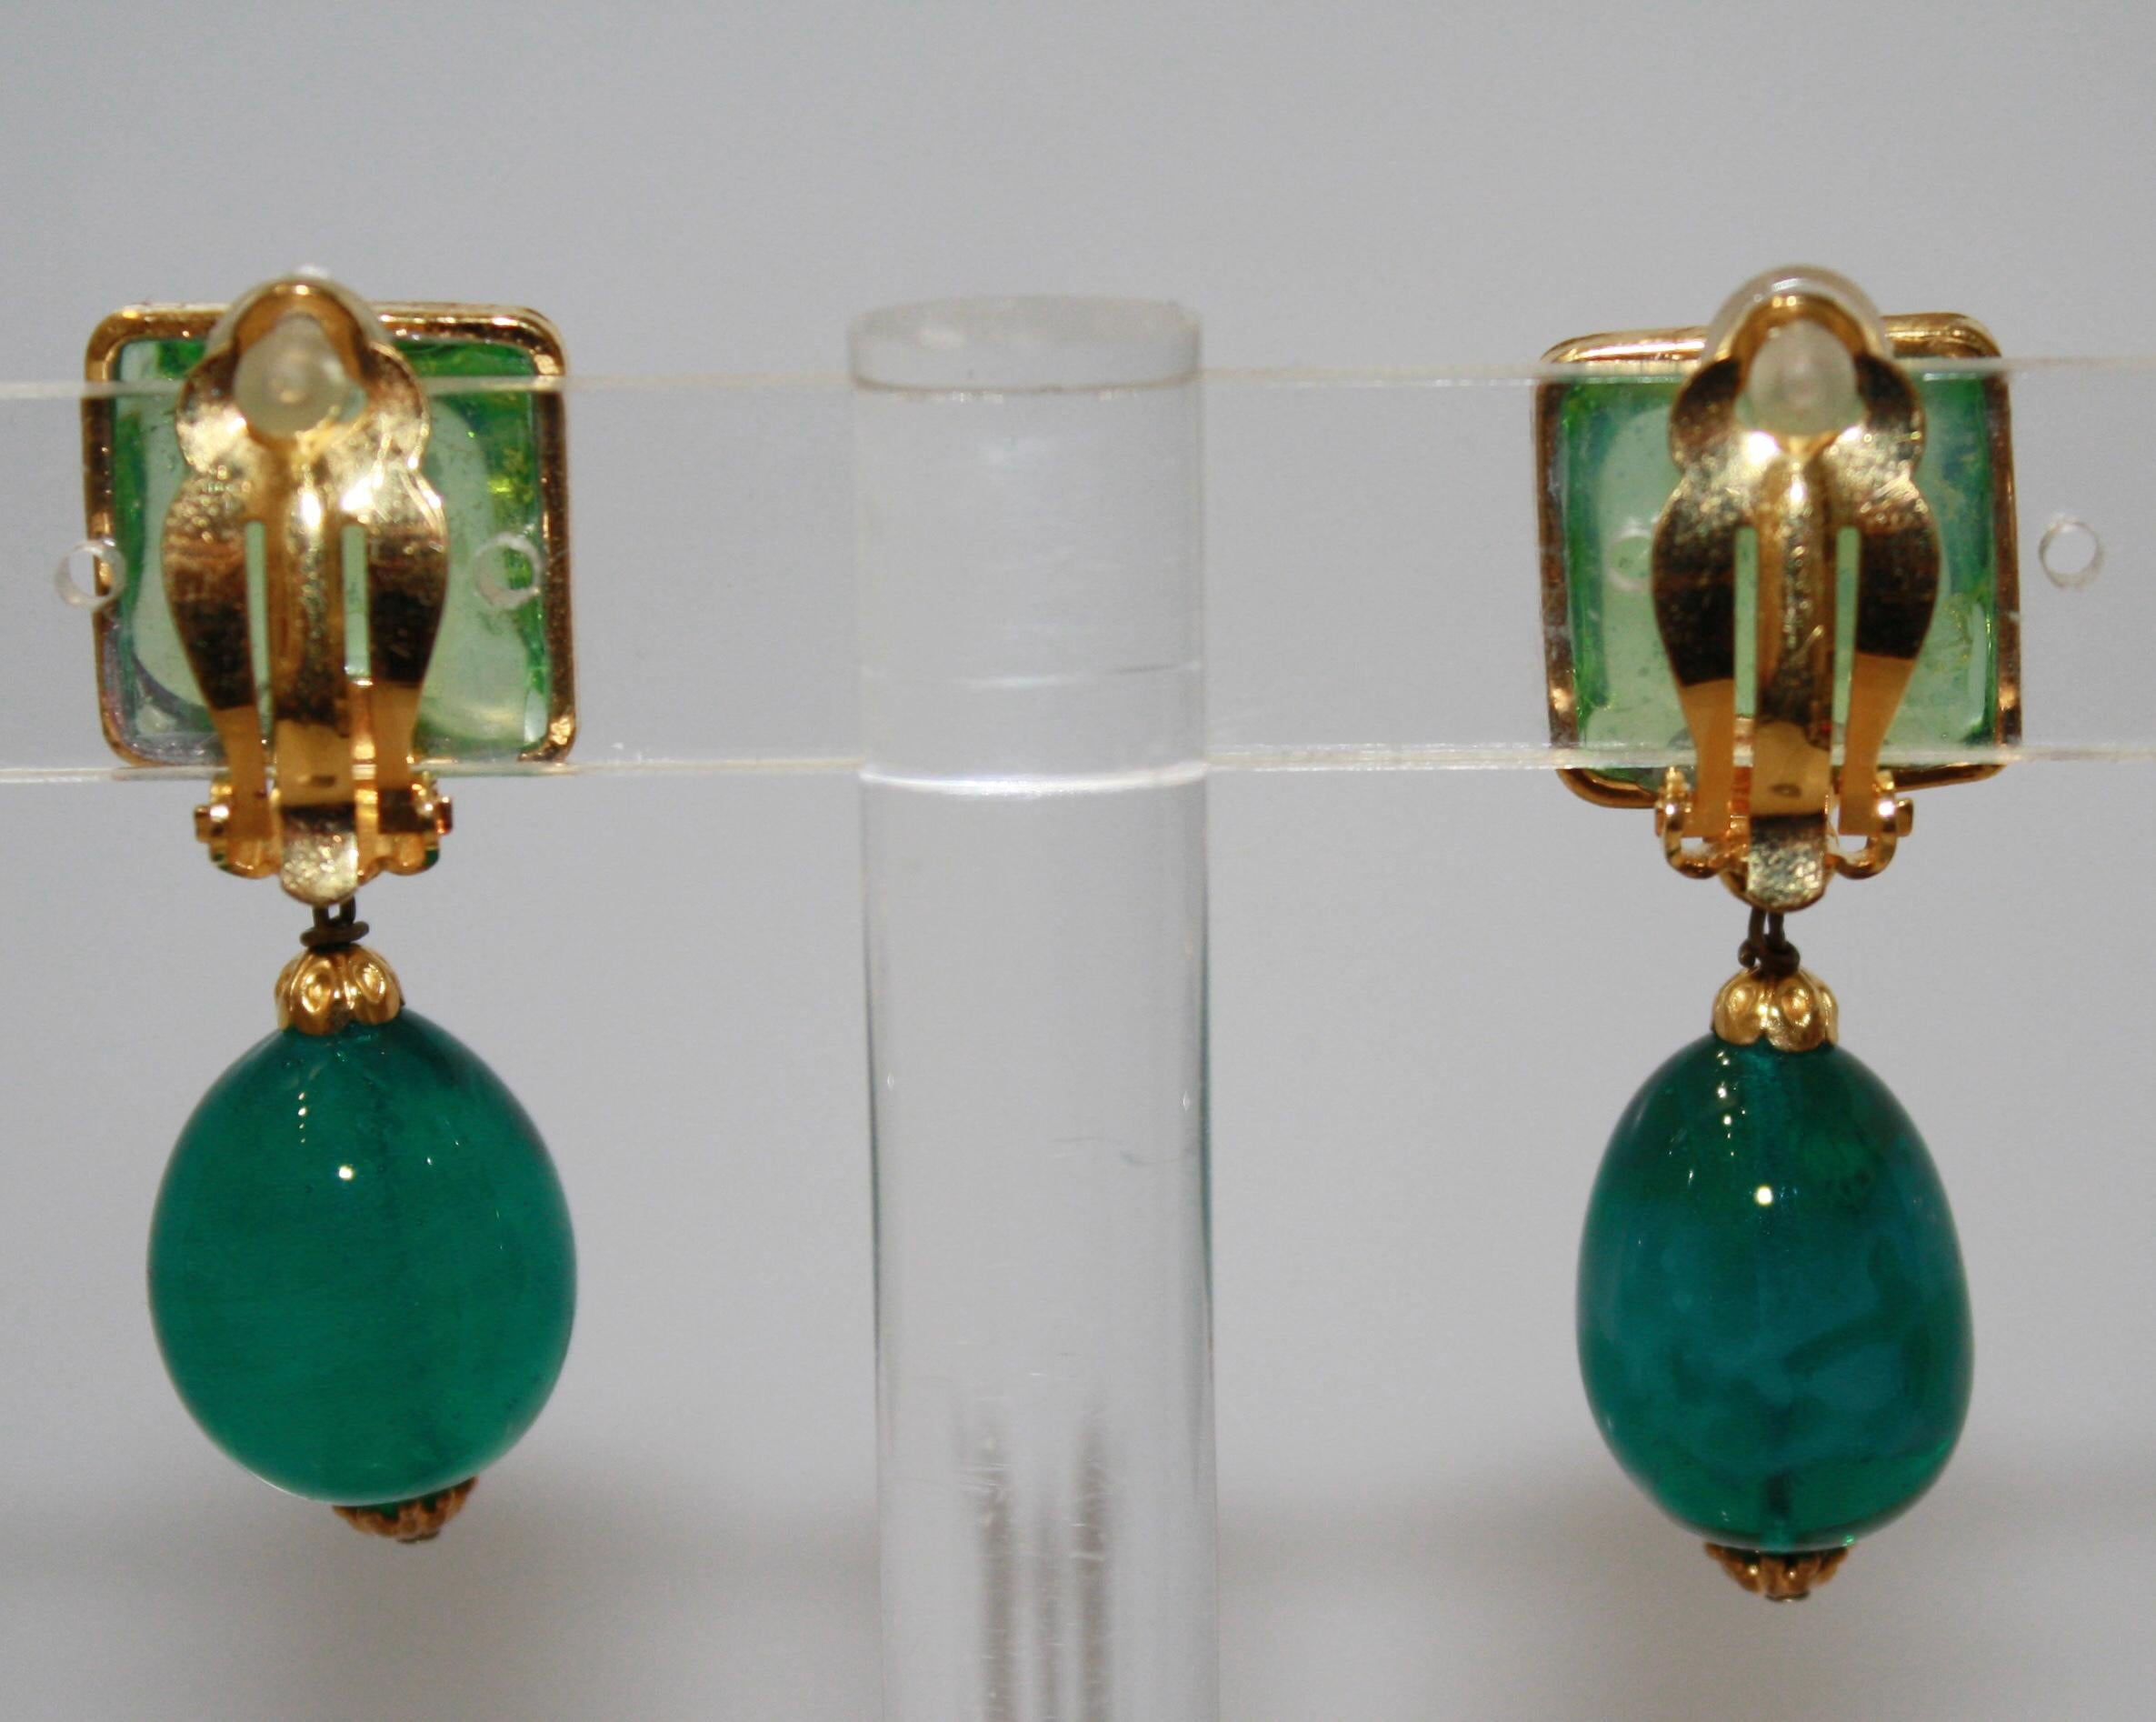 Gripoix work by the former artisans of the atelier, masters of poured glass designs.
Clip earrings. Top part has gold leaves inlaid.